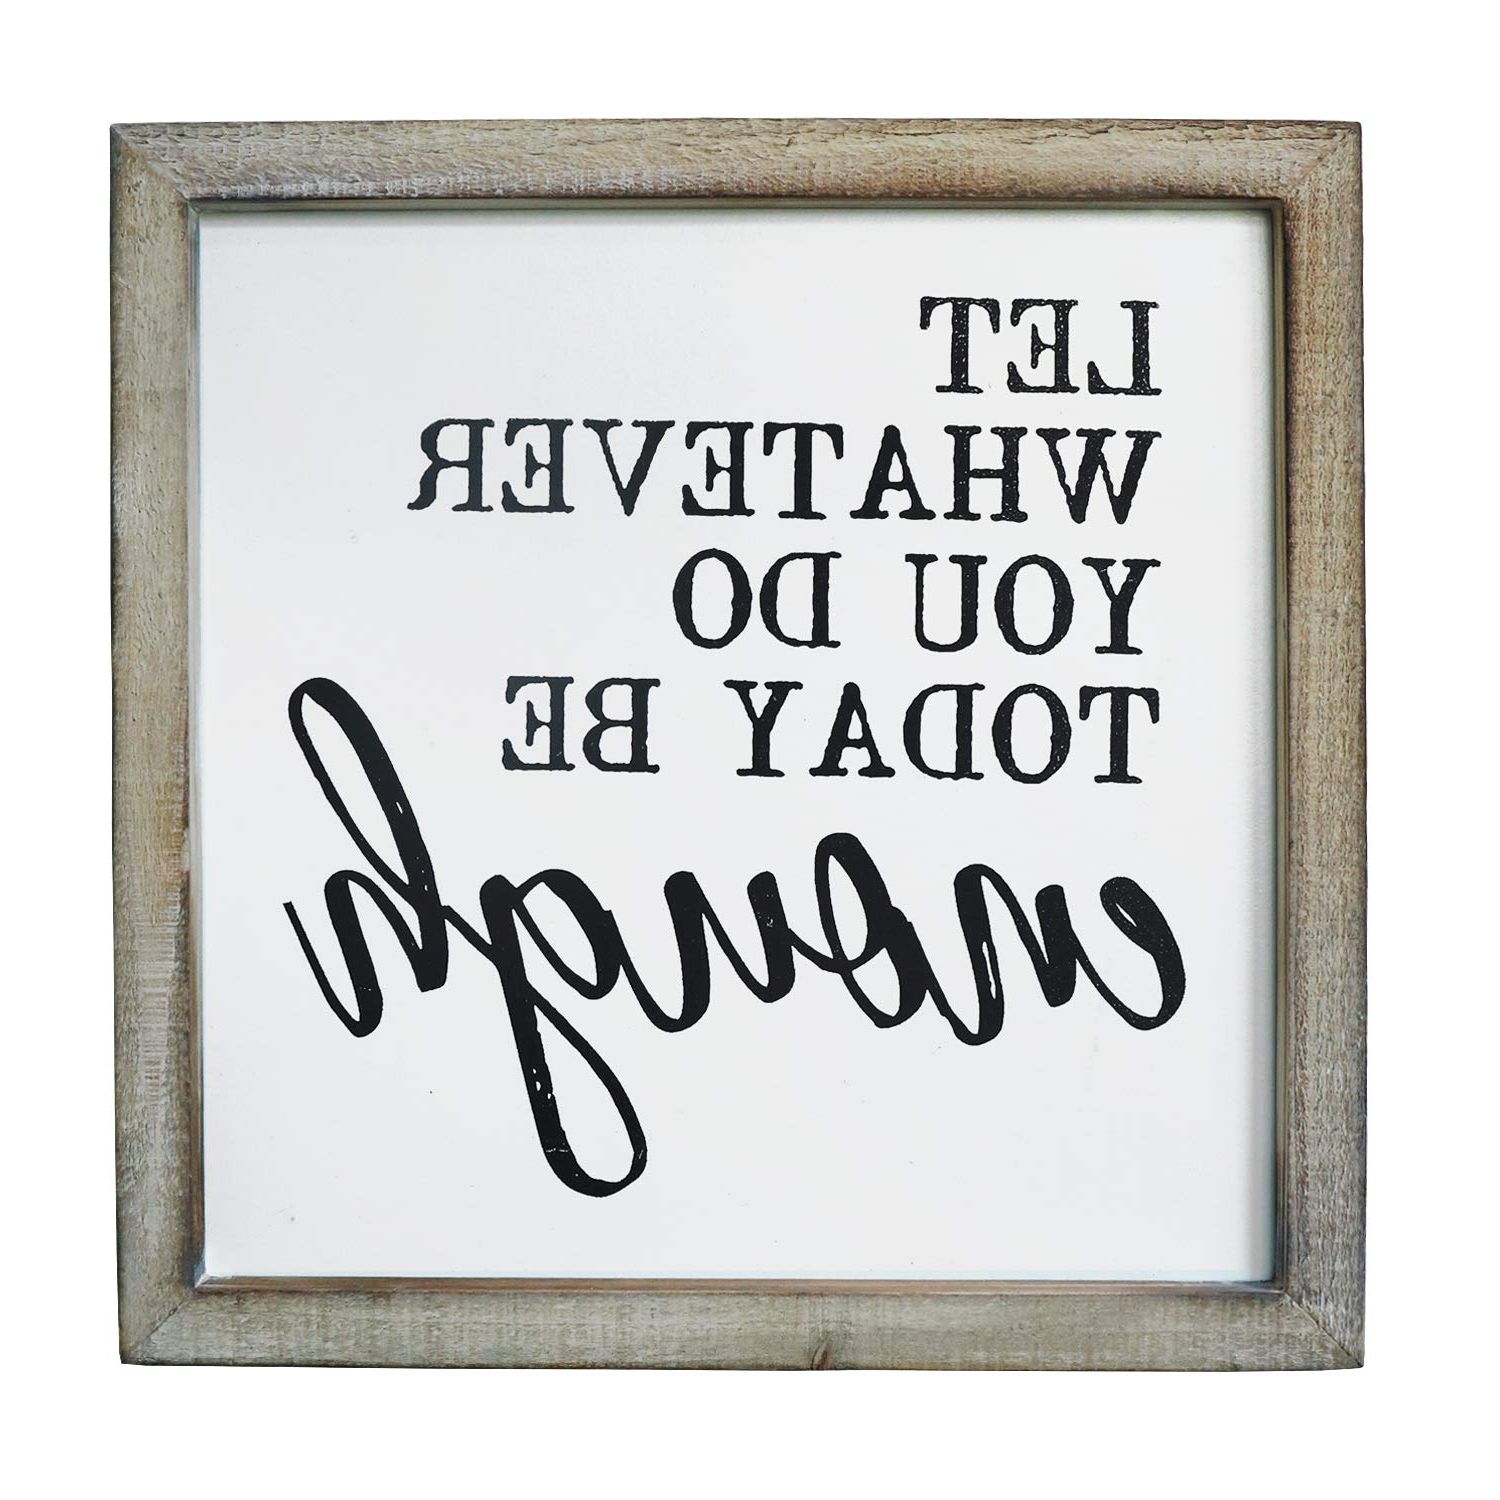 Favorite Let Whatever You Do Today Be Enough Wood Wall Decor For Amazon: Sany Dayo Home Wall Decor Signs With Inspirational (View 4 of 20)